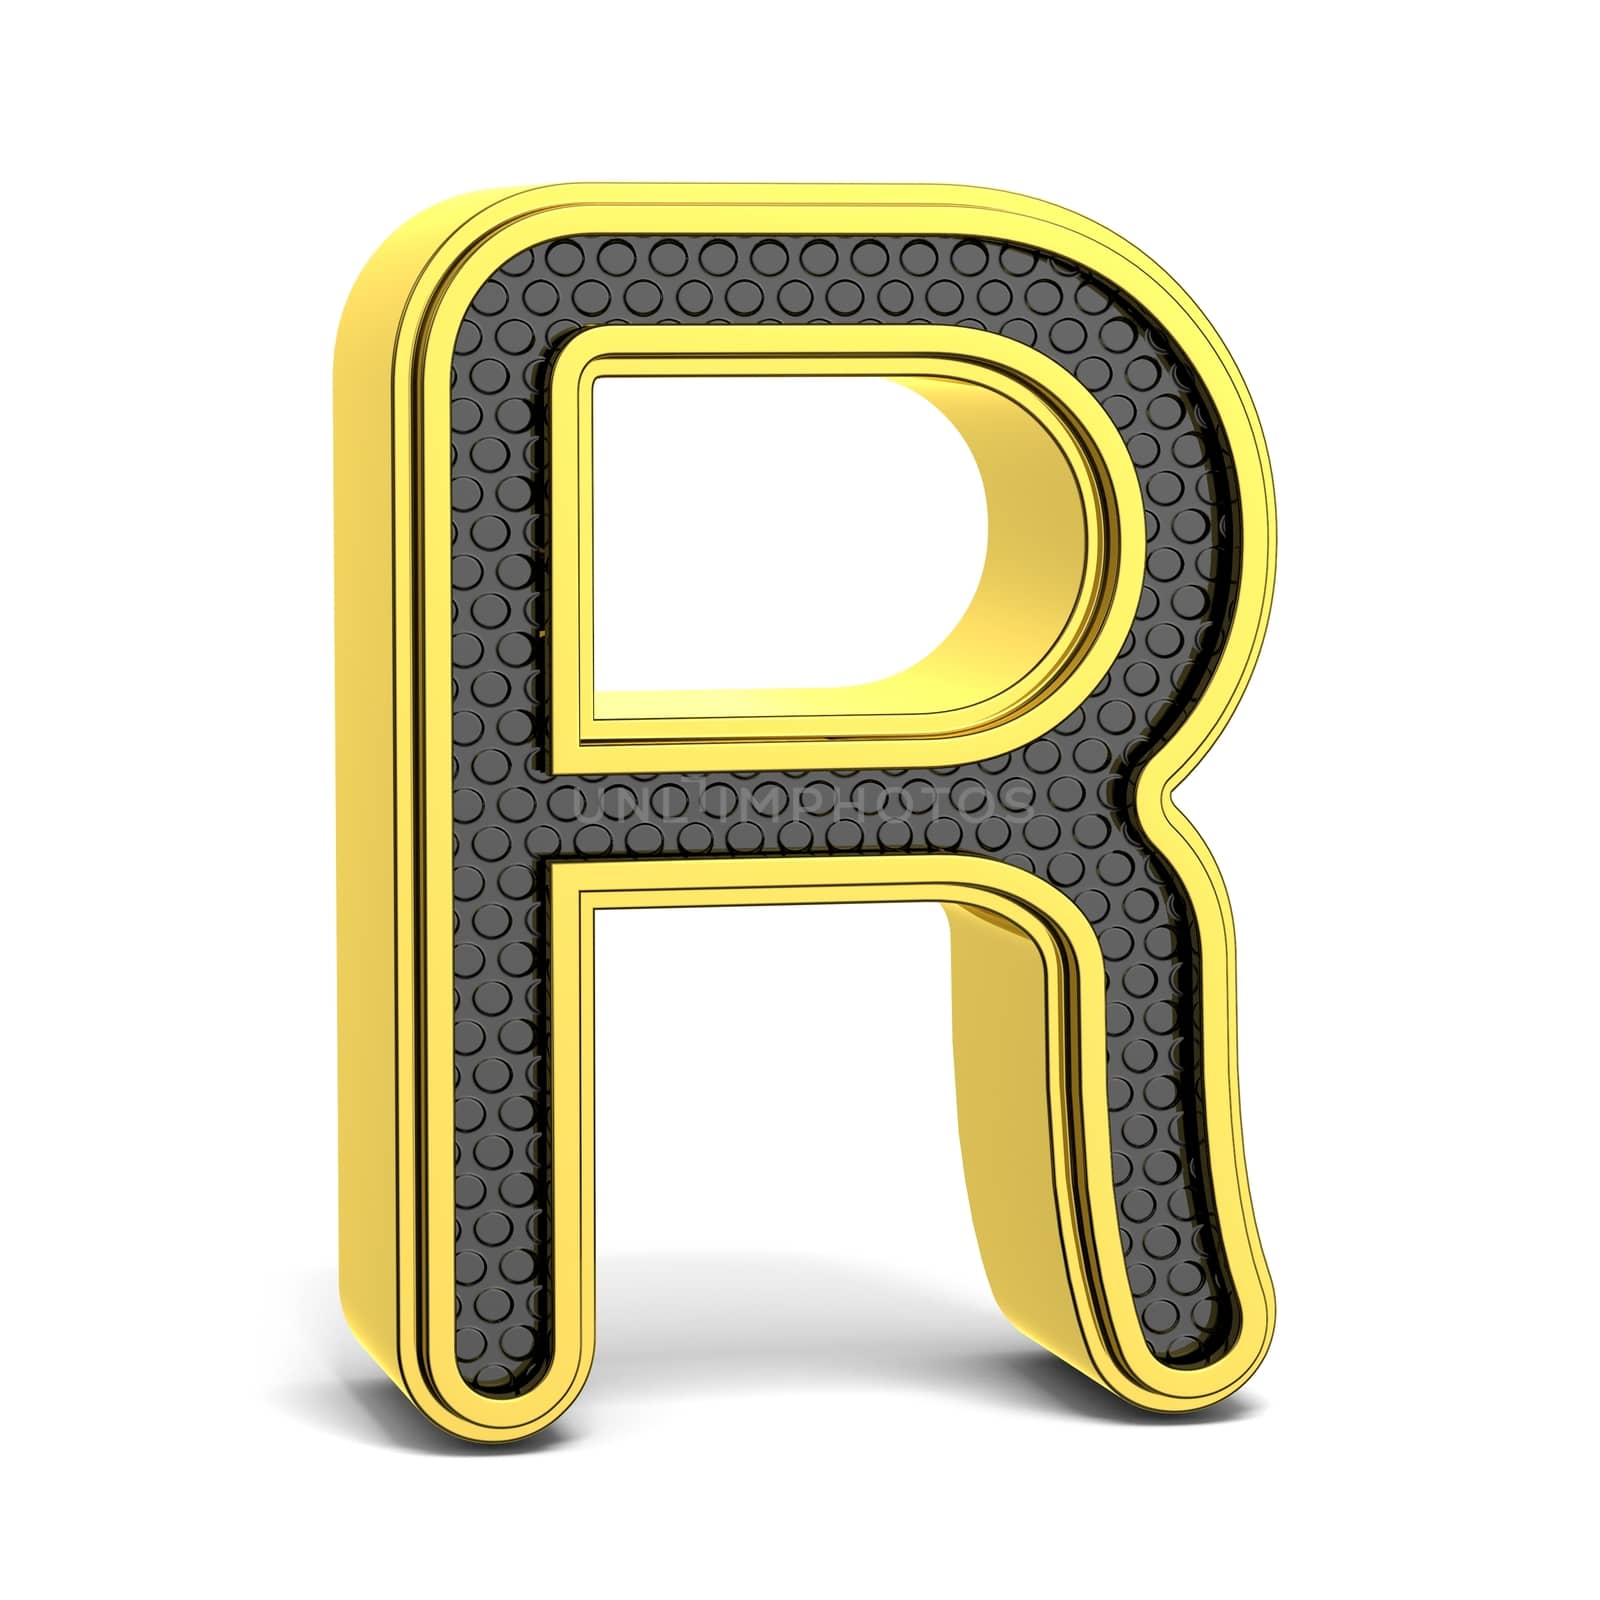 Golden and black round alphabet. Letter R. 3D render illustration isolated on white background with soft shadow